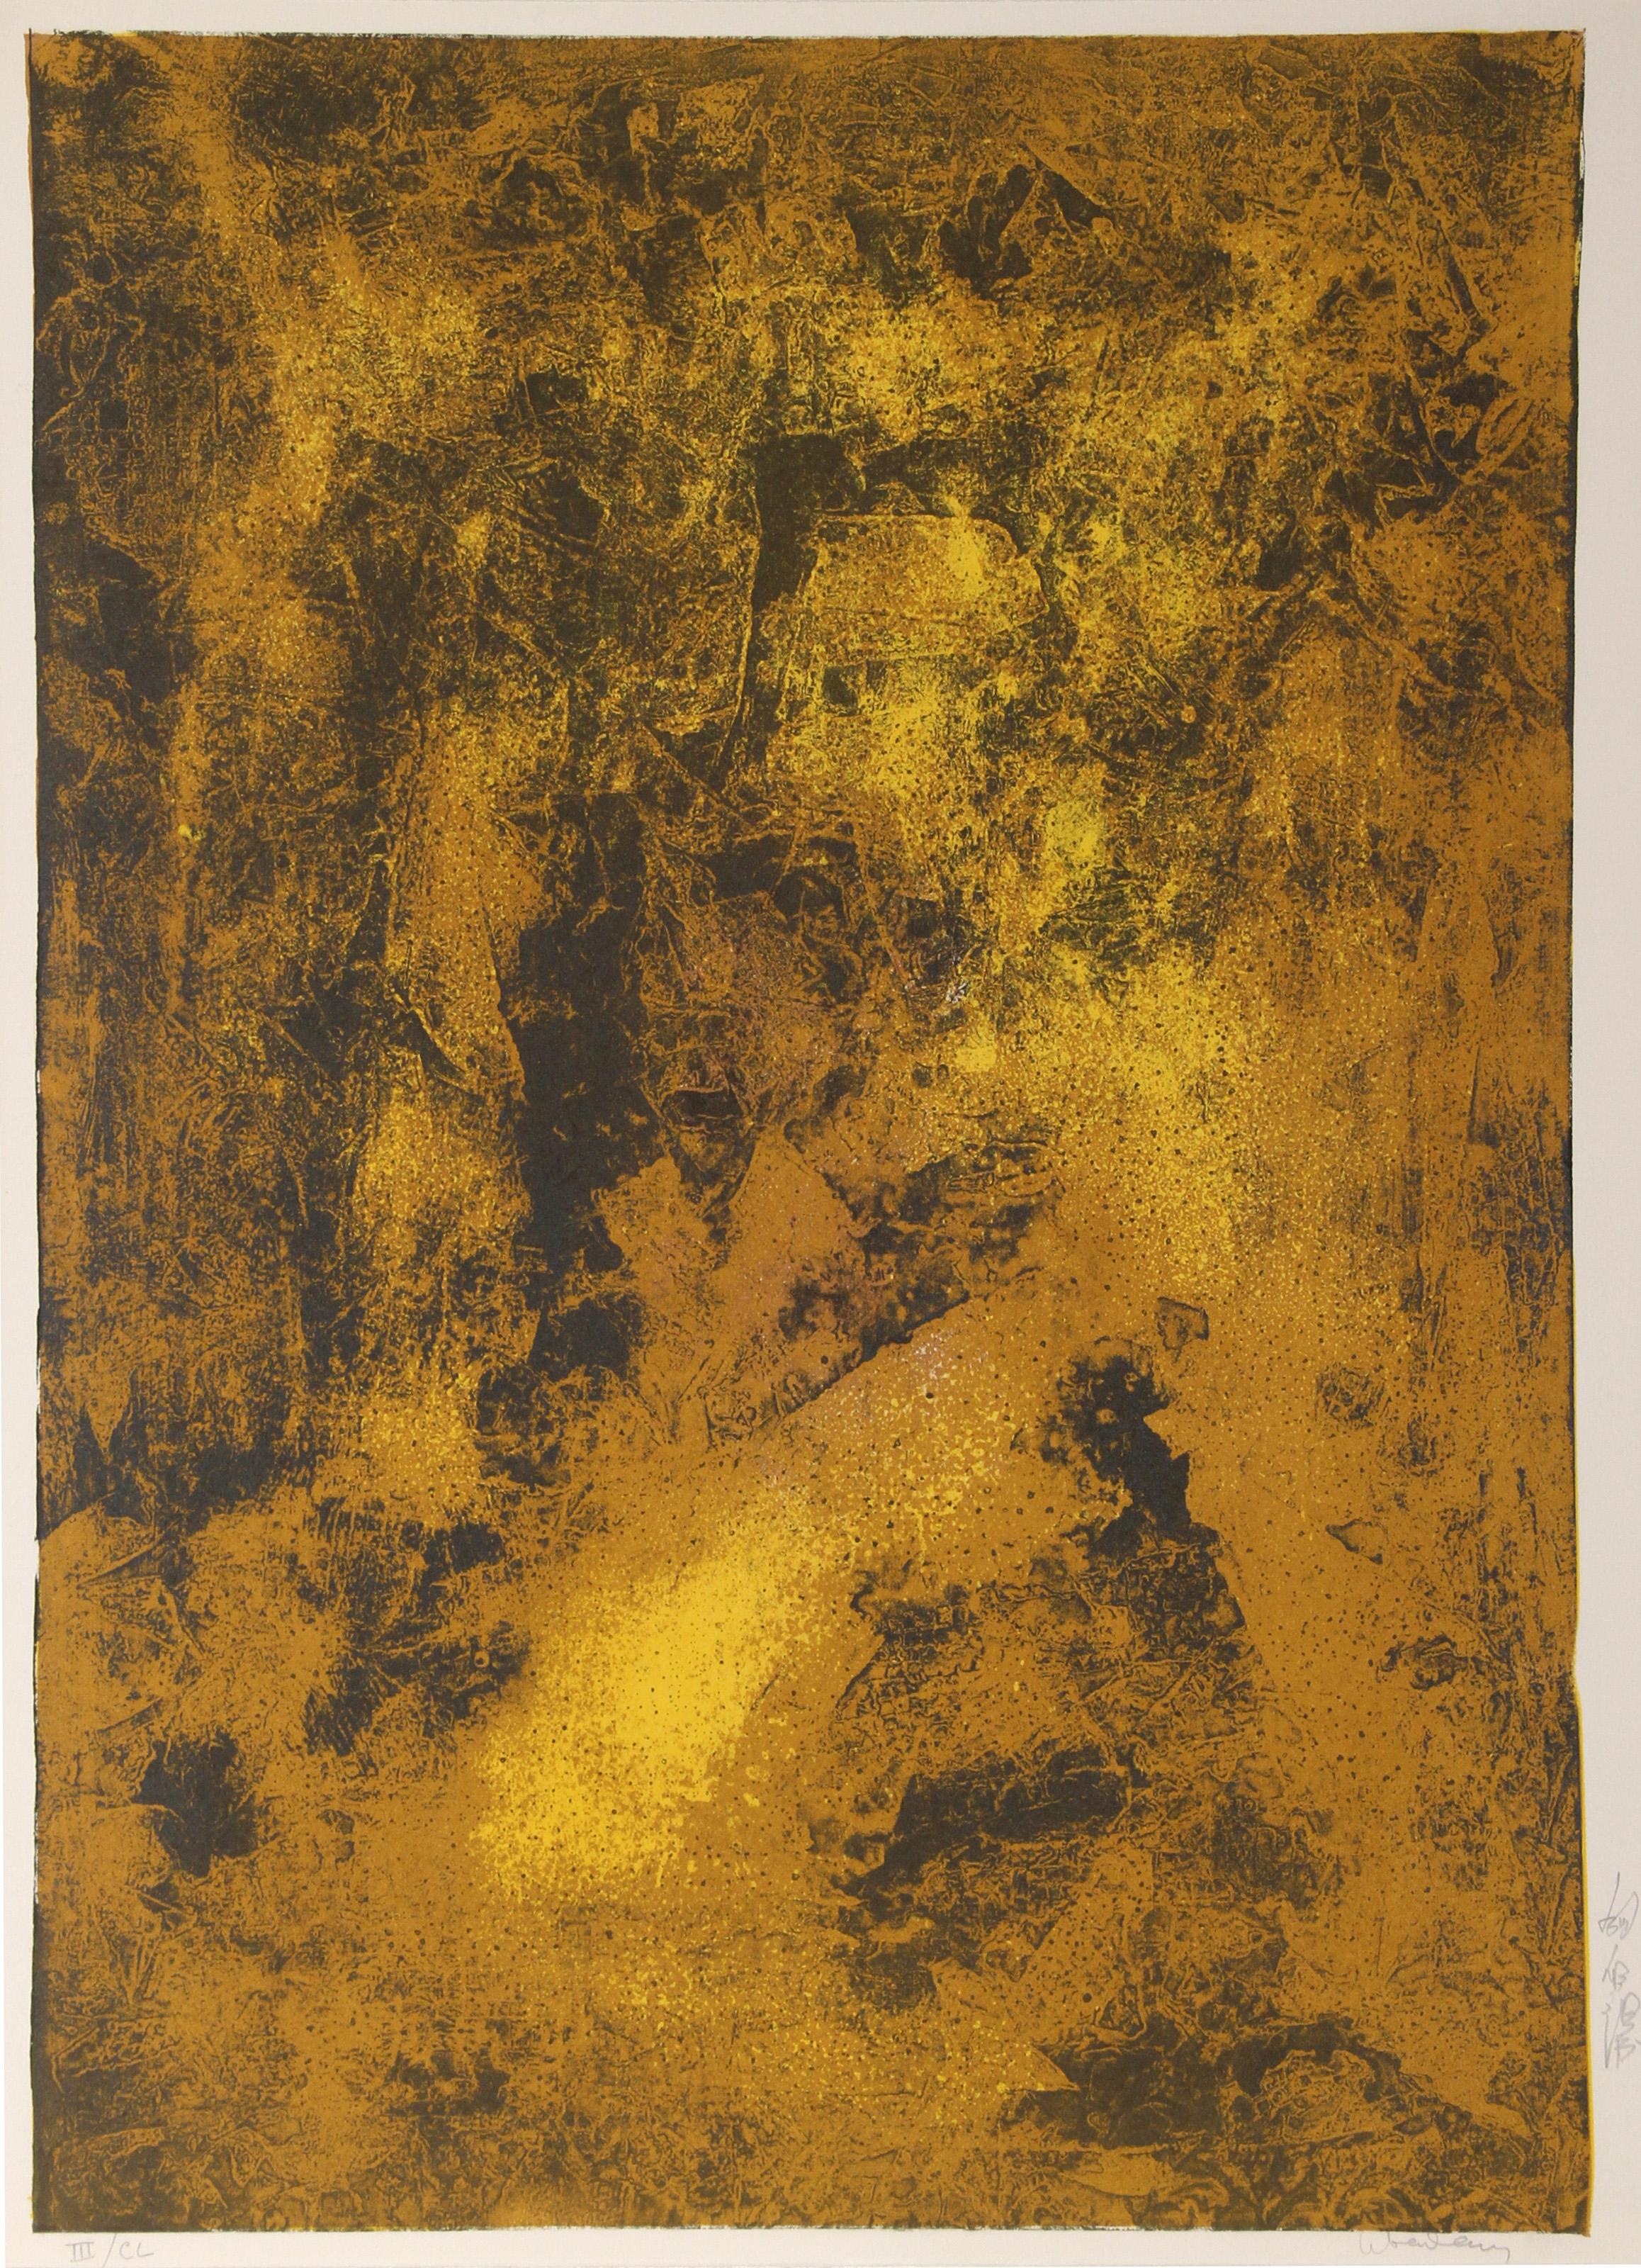 Lebadang (aka Hoi), Vietnamese (1922 - 2015) -  Nature Prays Without Words 4. Year: 1967, Medium: Lithograph on Arches, signed and numbered in pencil, Edition: III/CL, Size: 30  x 22 in. (76.2  x 55.88 cm) 